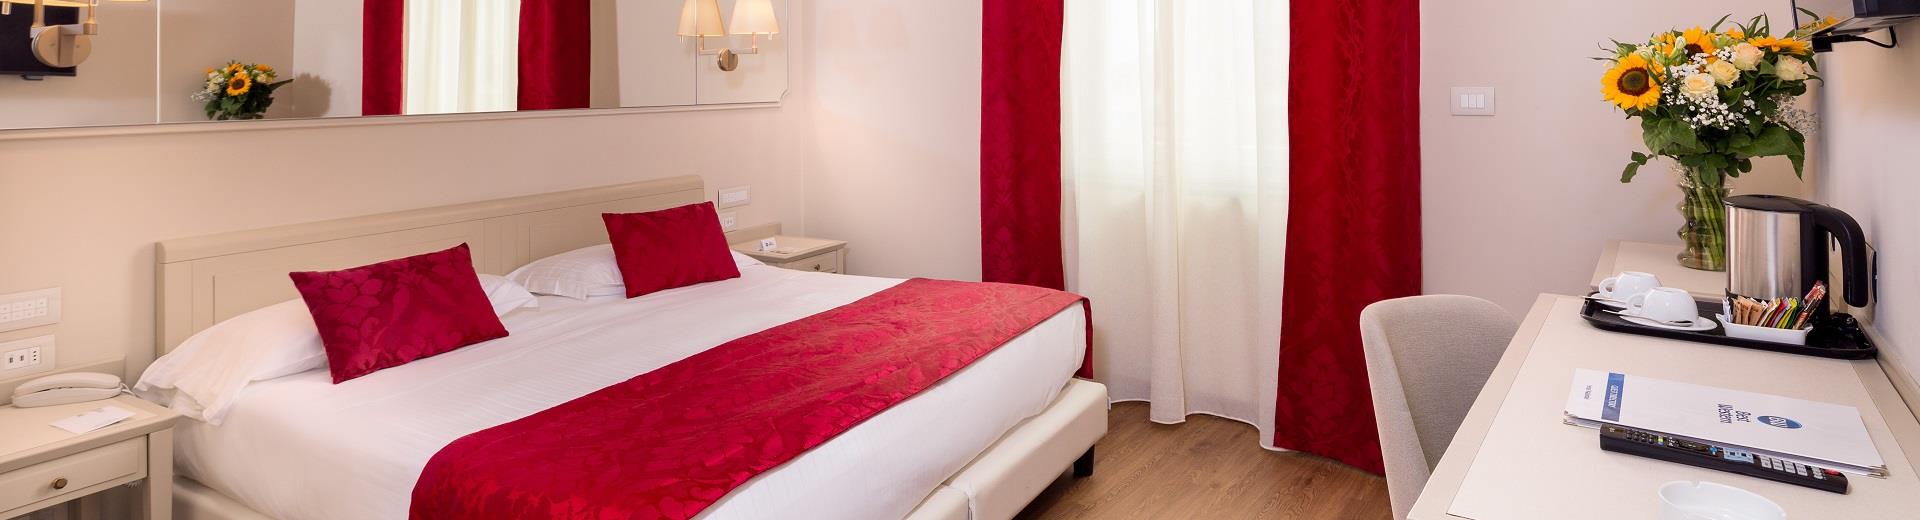 Comfort and services in the rooms of the BW Hotel Nazionale Sanremo